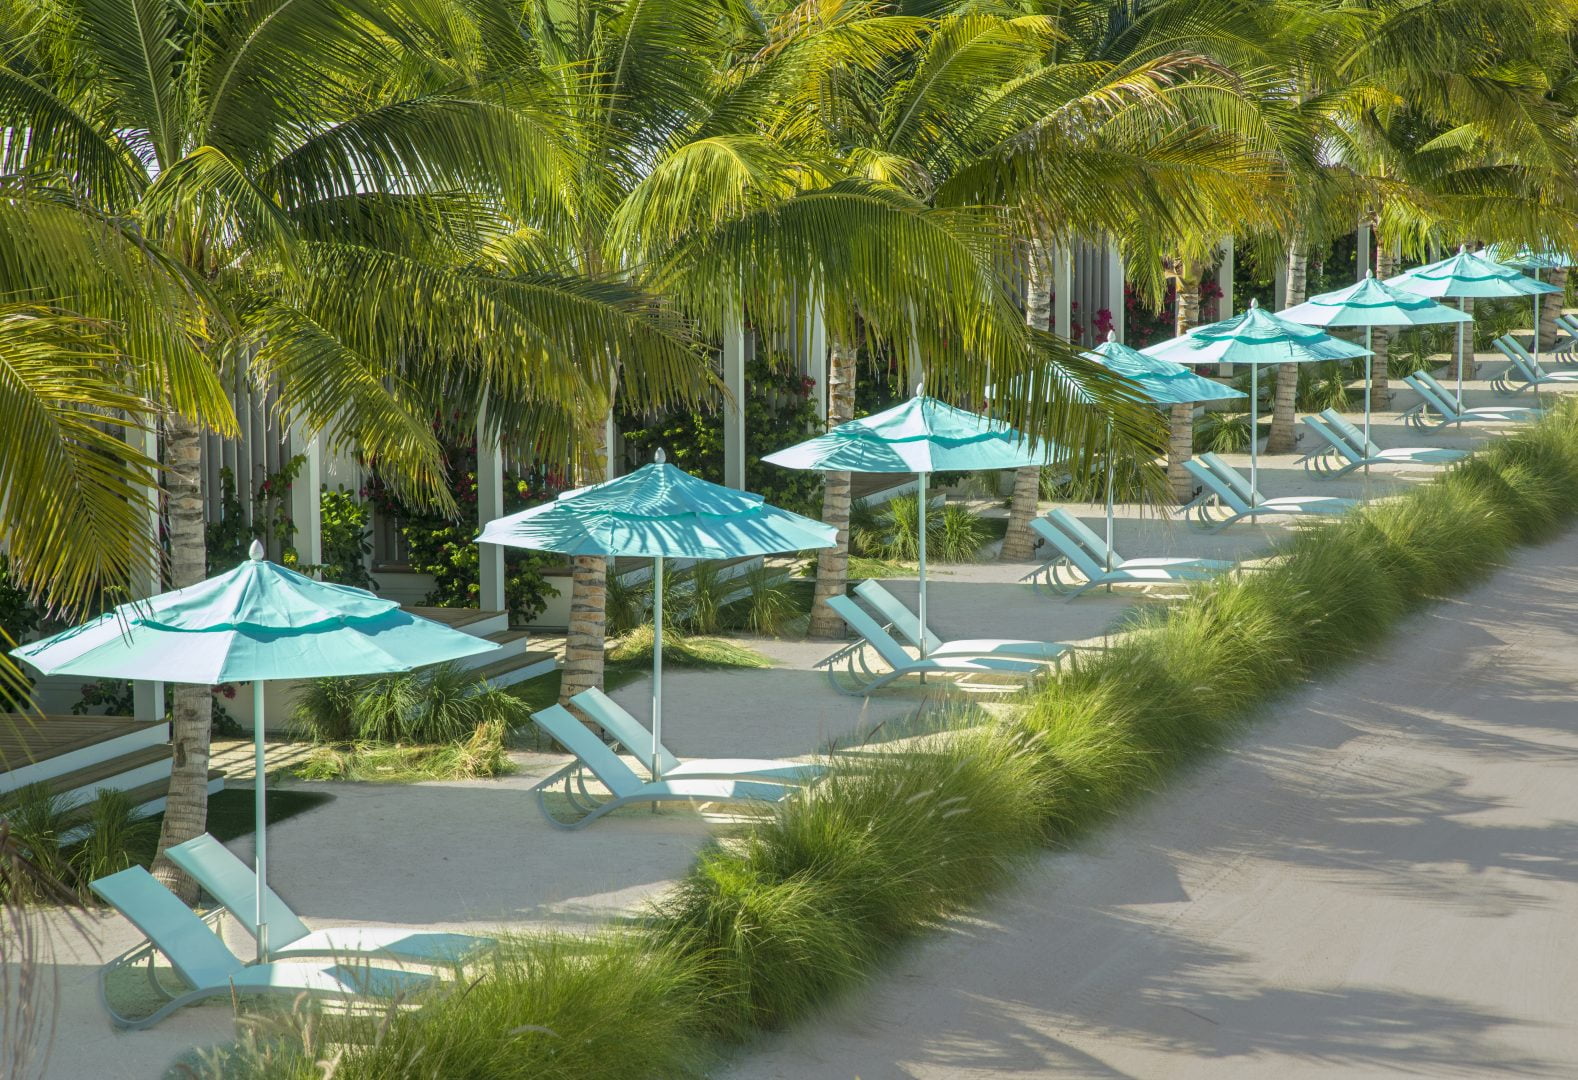 palm trees and lounge chairs with umbrellas